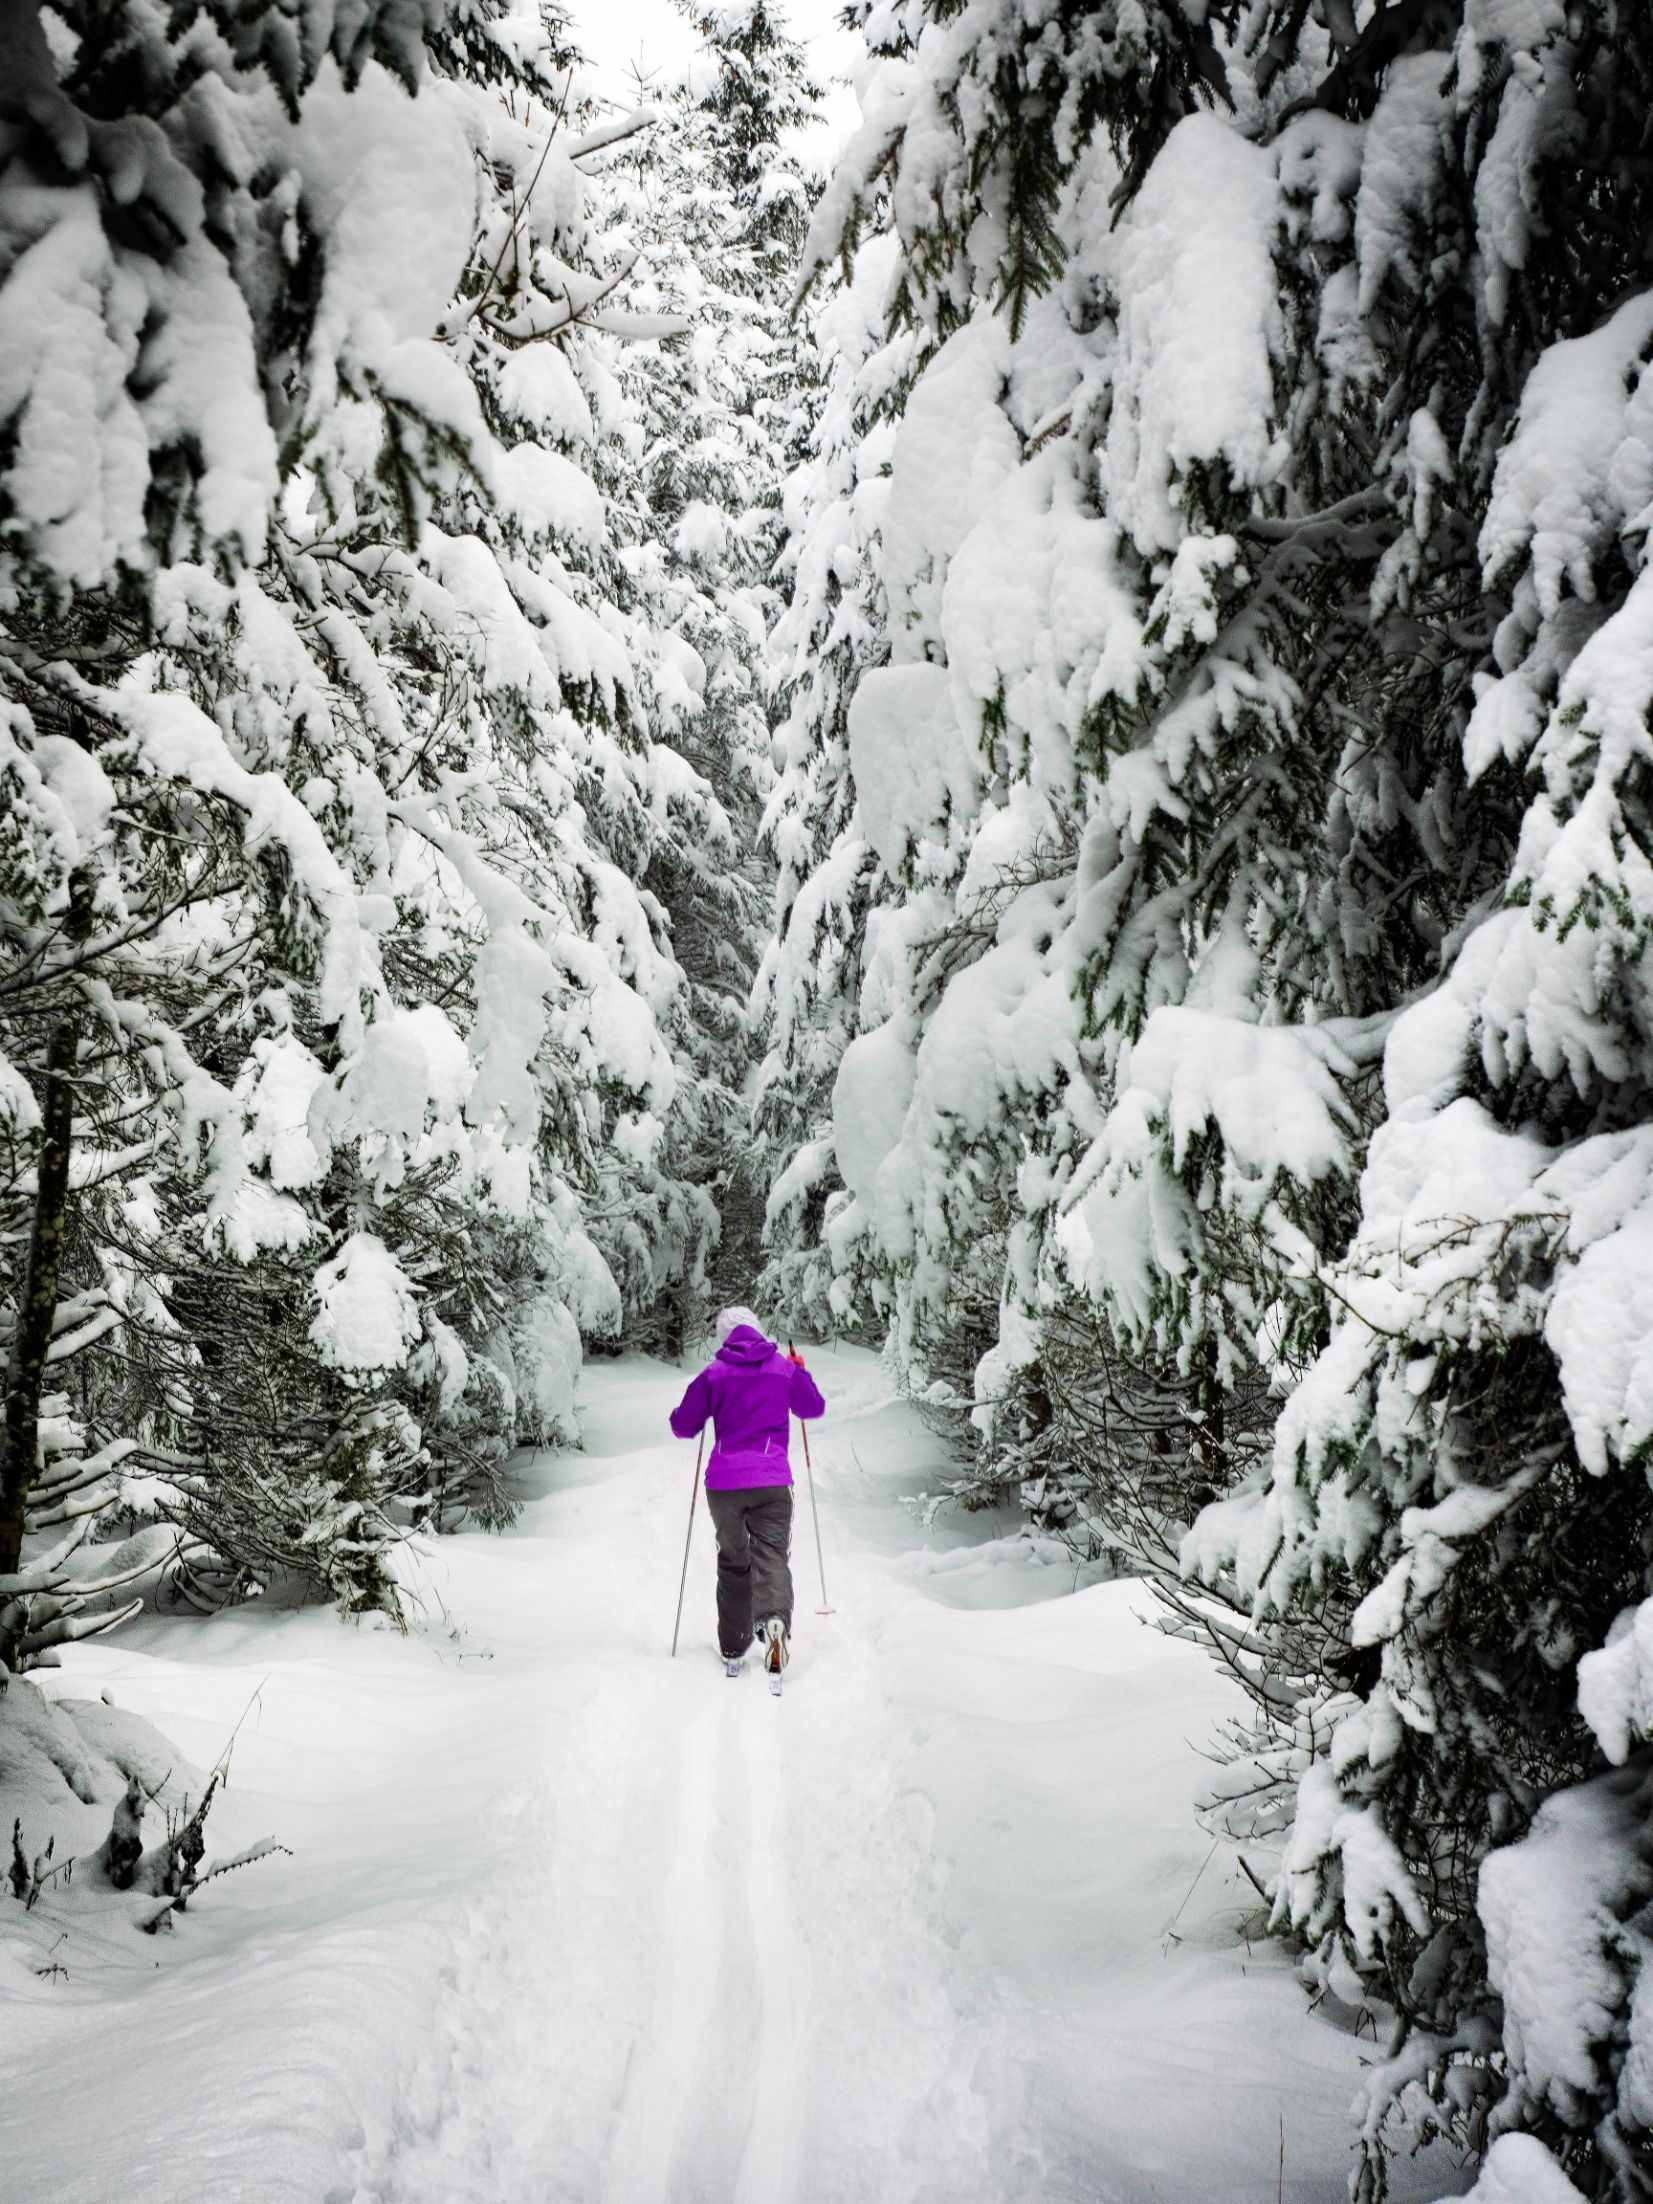 There's nothing like a Scandinavian forest covered in snow to set the imagination dreaming. Photo: Simon Berger